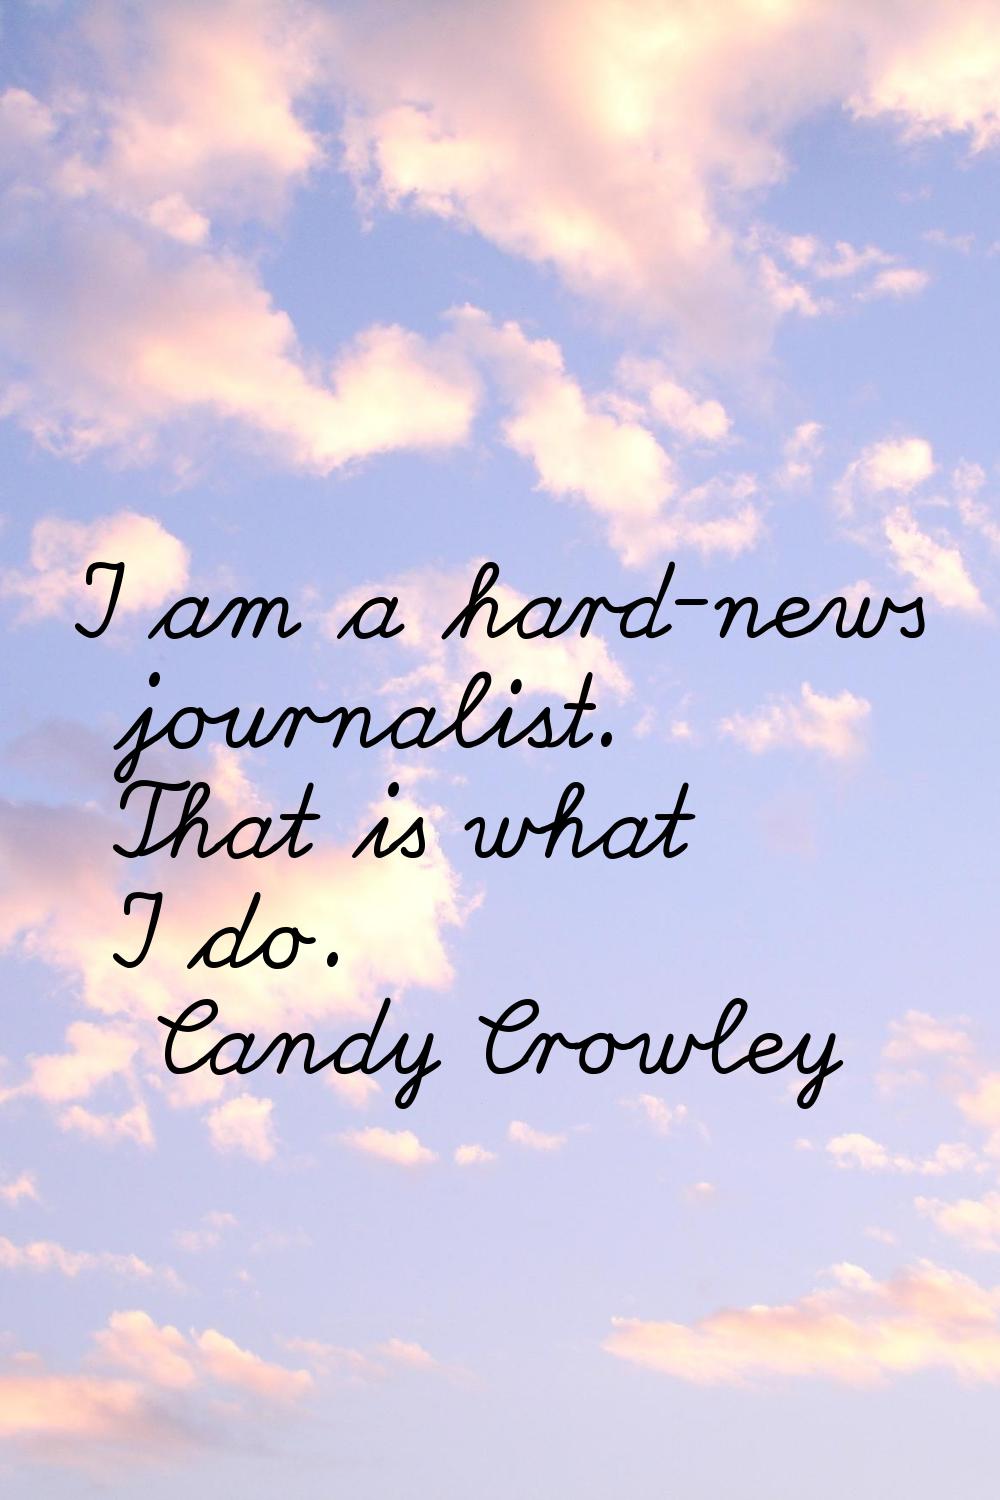 I am a hard-news journalist. That is what I do.